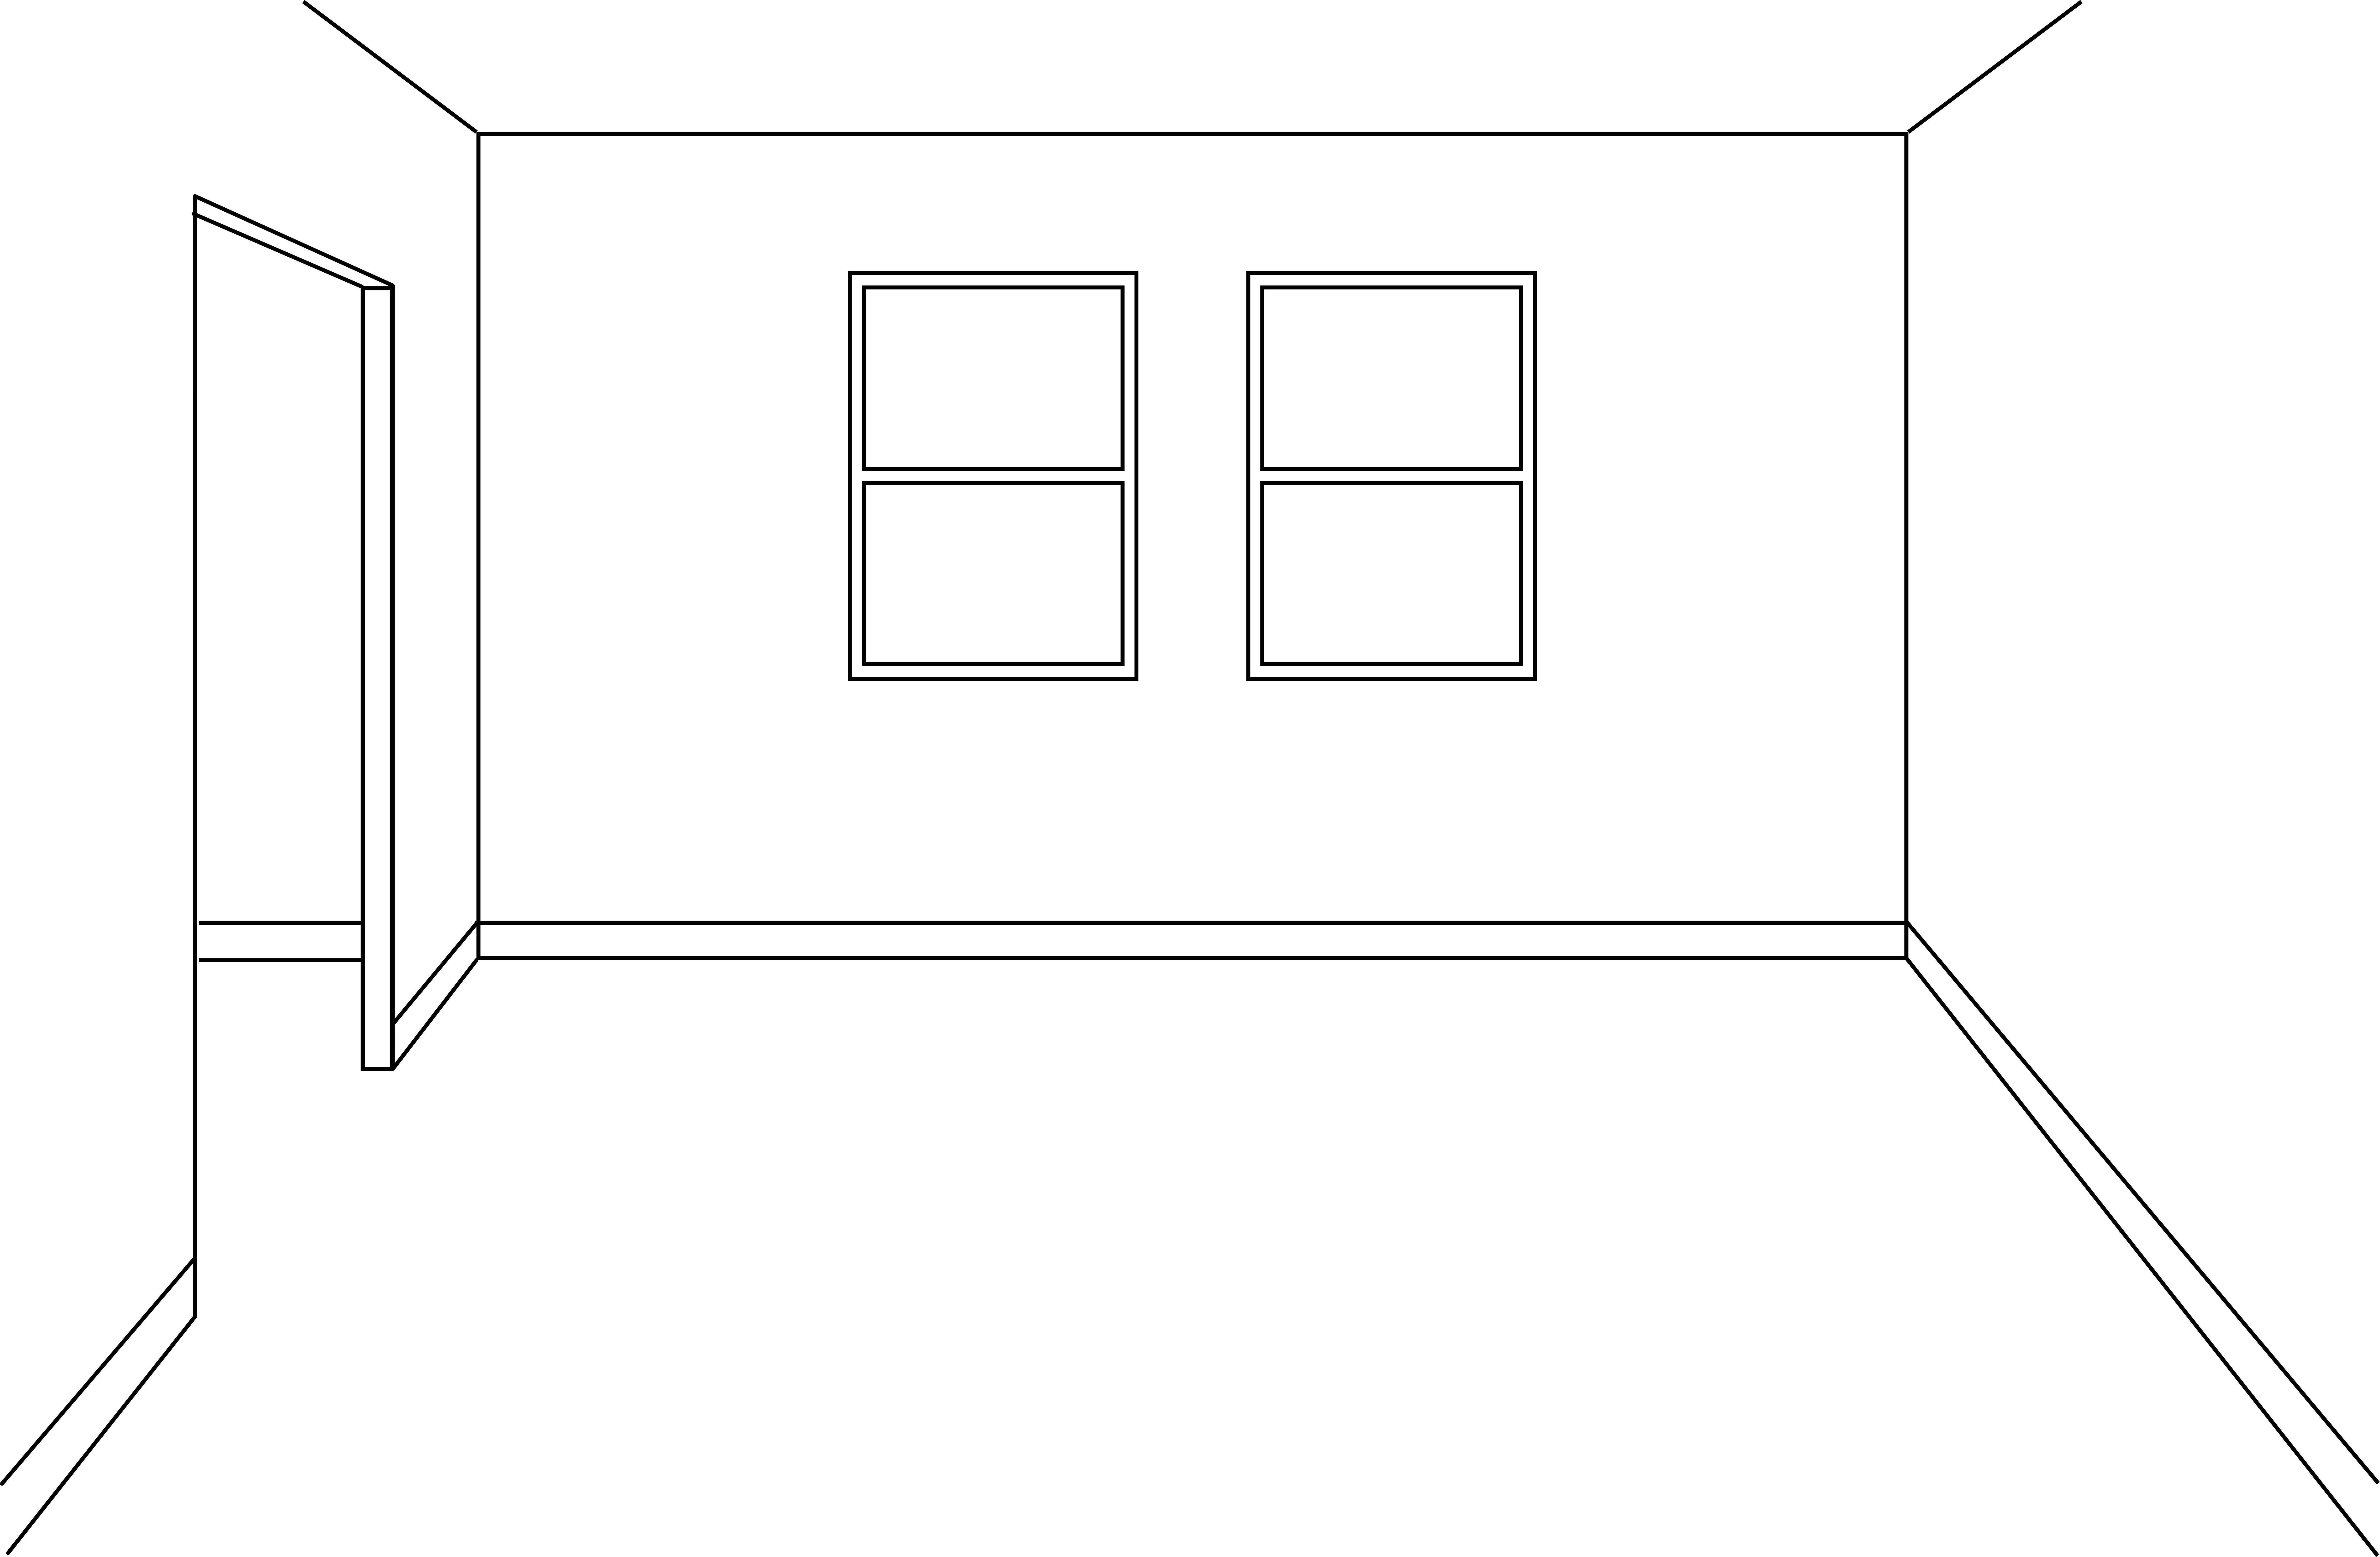 Line drawing of a blank 10 foot by 13 foot living room, with a doorway on the left and two windows on the back wall